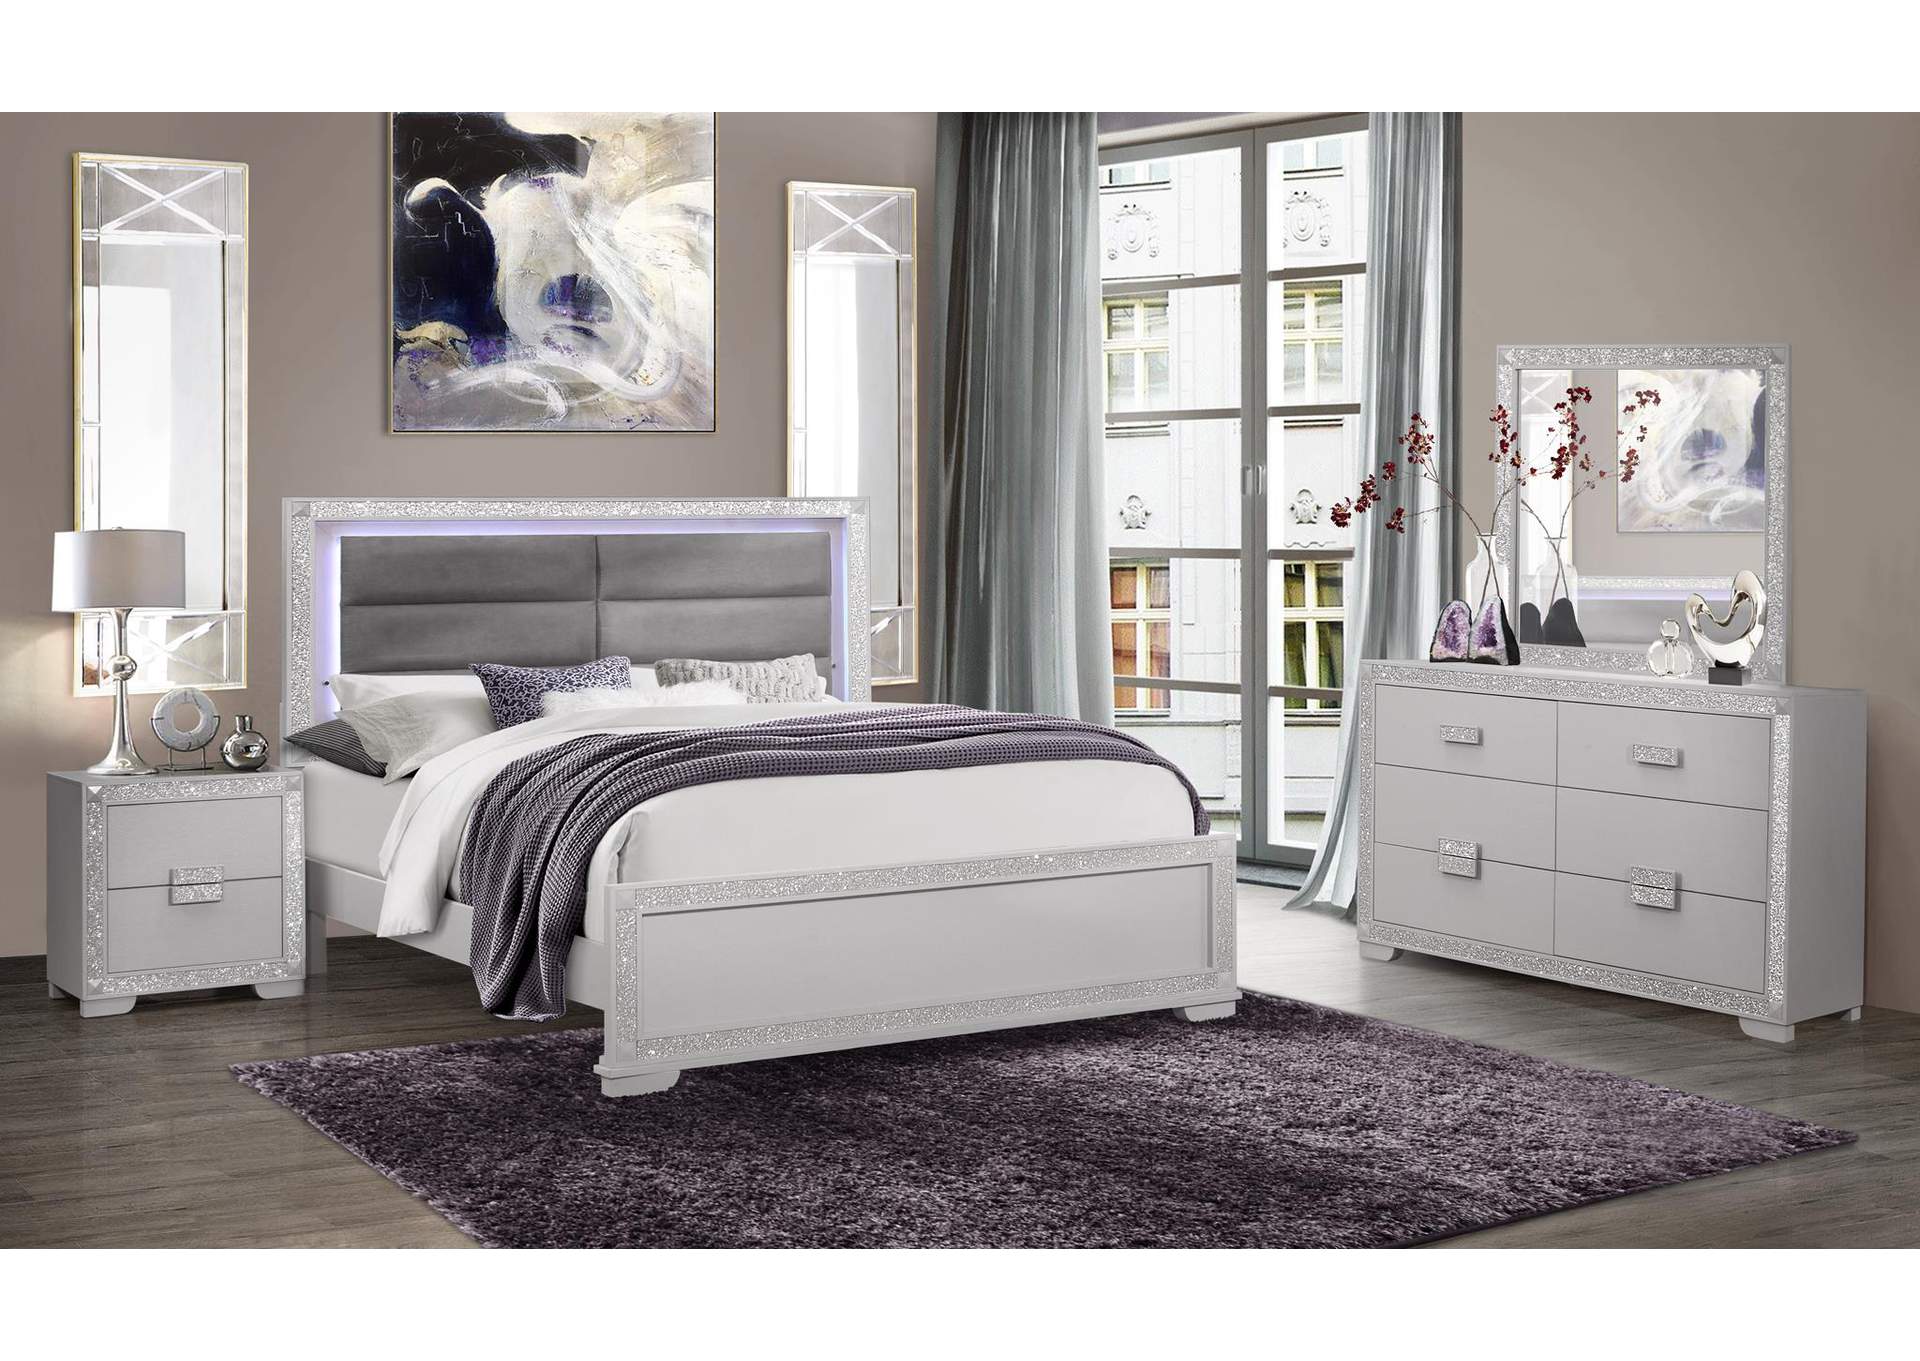 Silver Chalice King Bed,Global Furniture USA